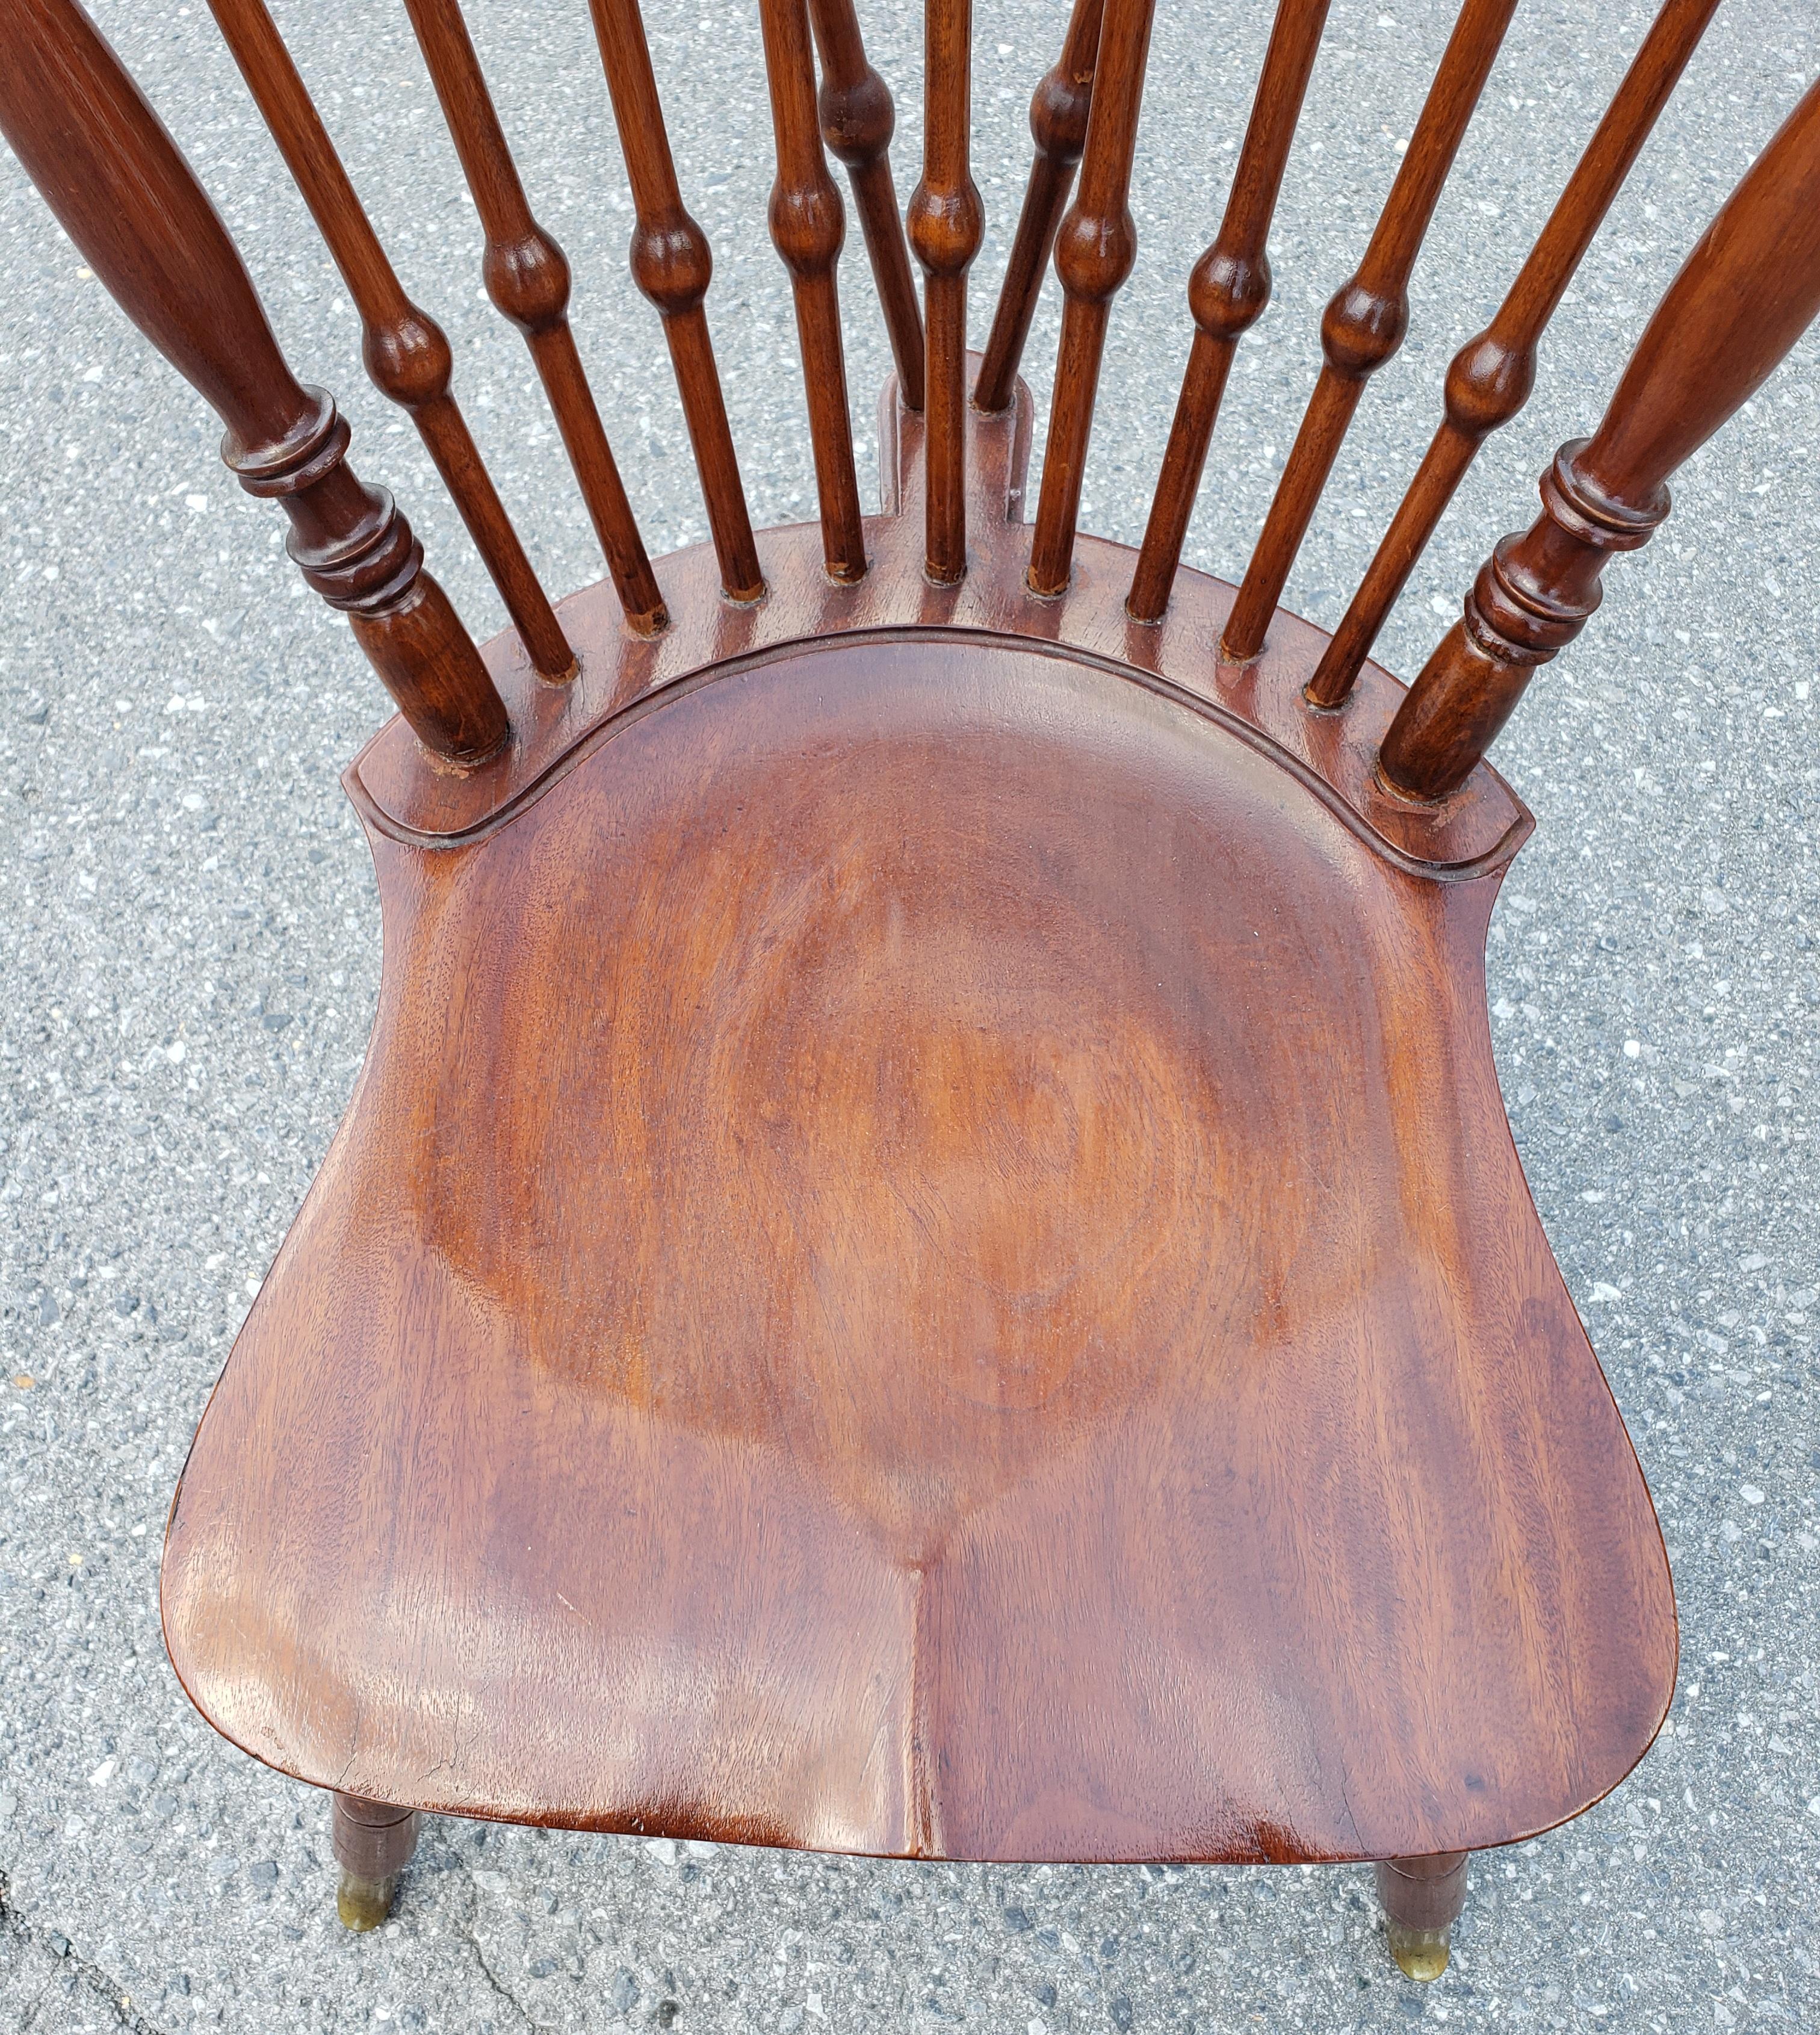 Mid-Century Mahogany Brace Back Sadle Seat Windsor Chair W Brass Leg Caps  In Good Condition For Sale In Germantown, MD